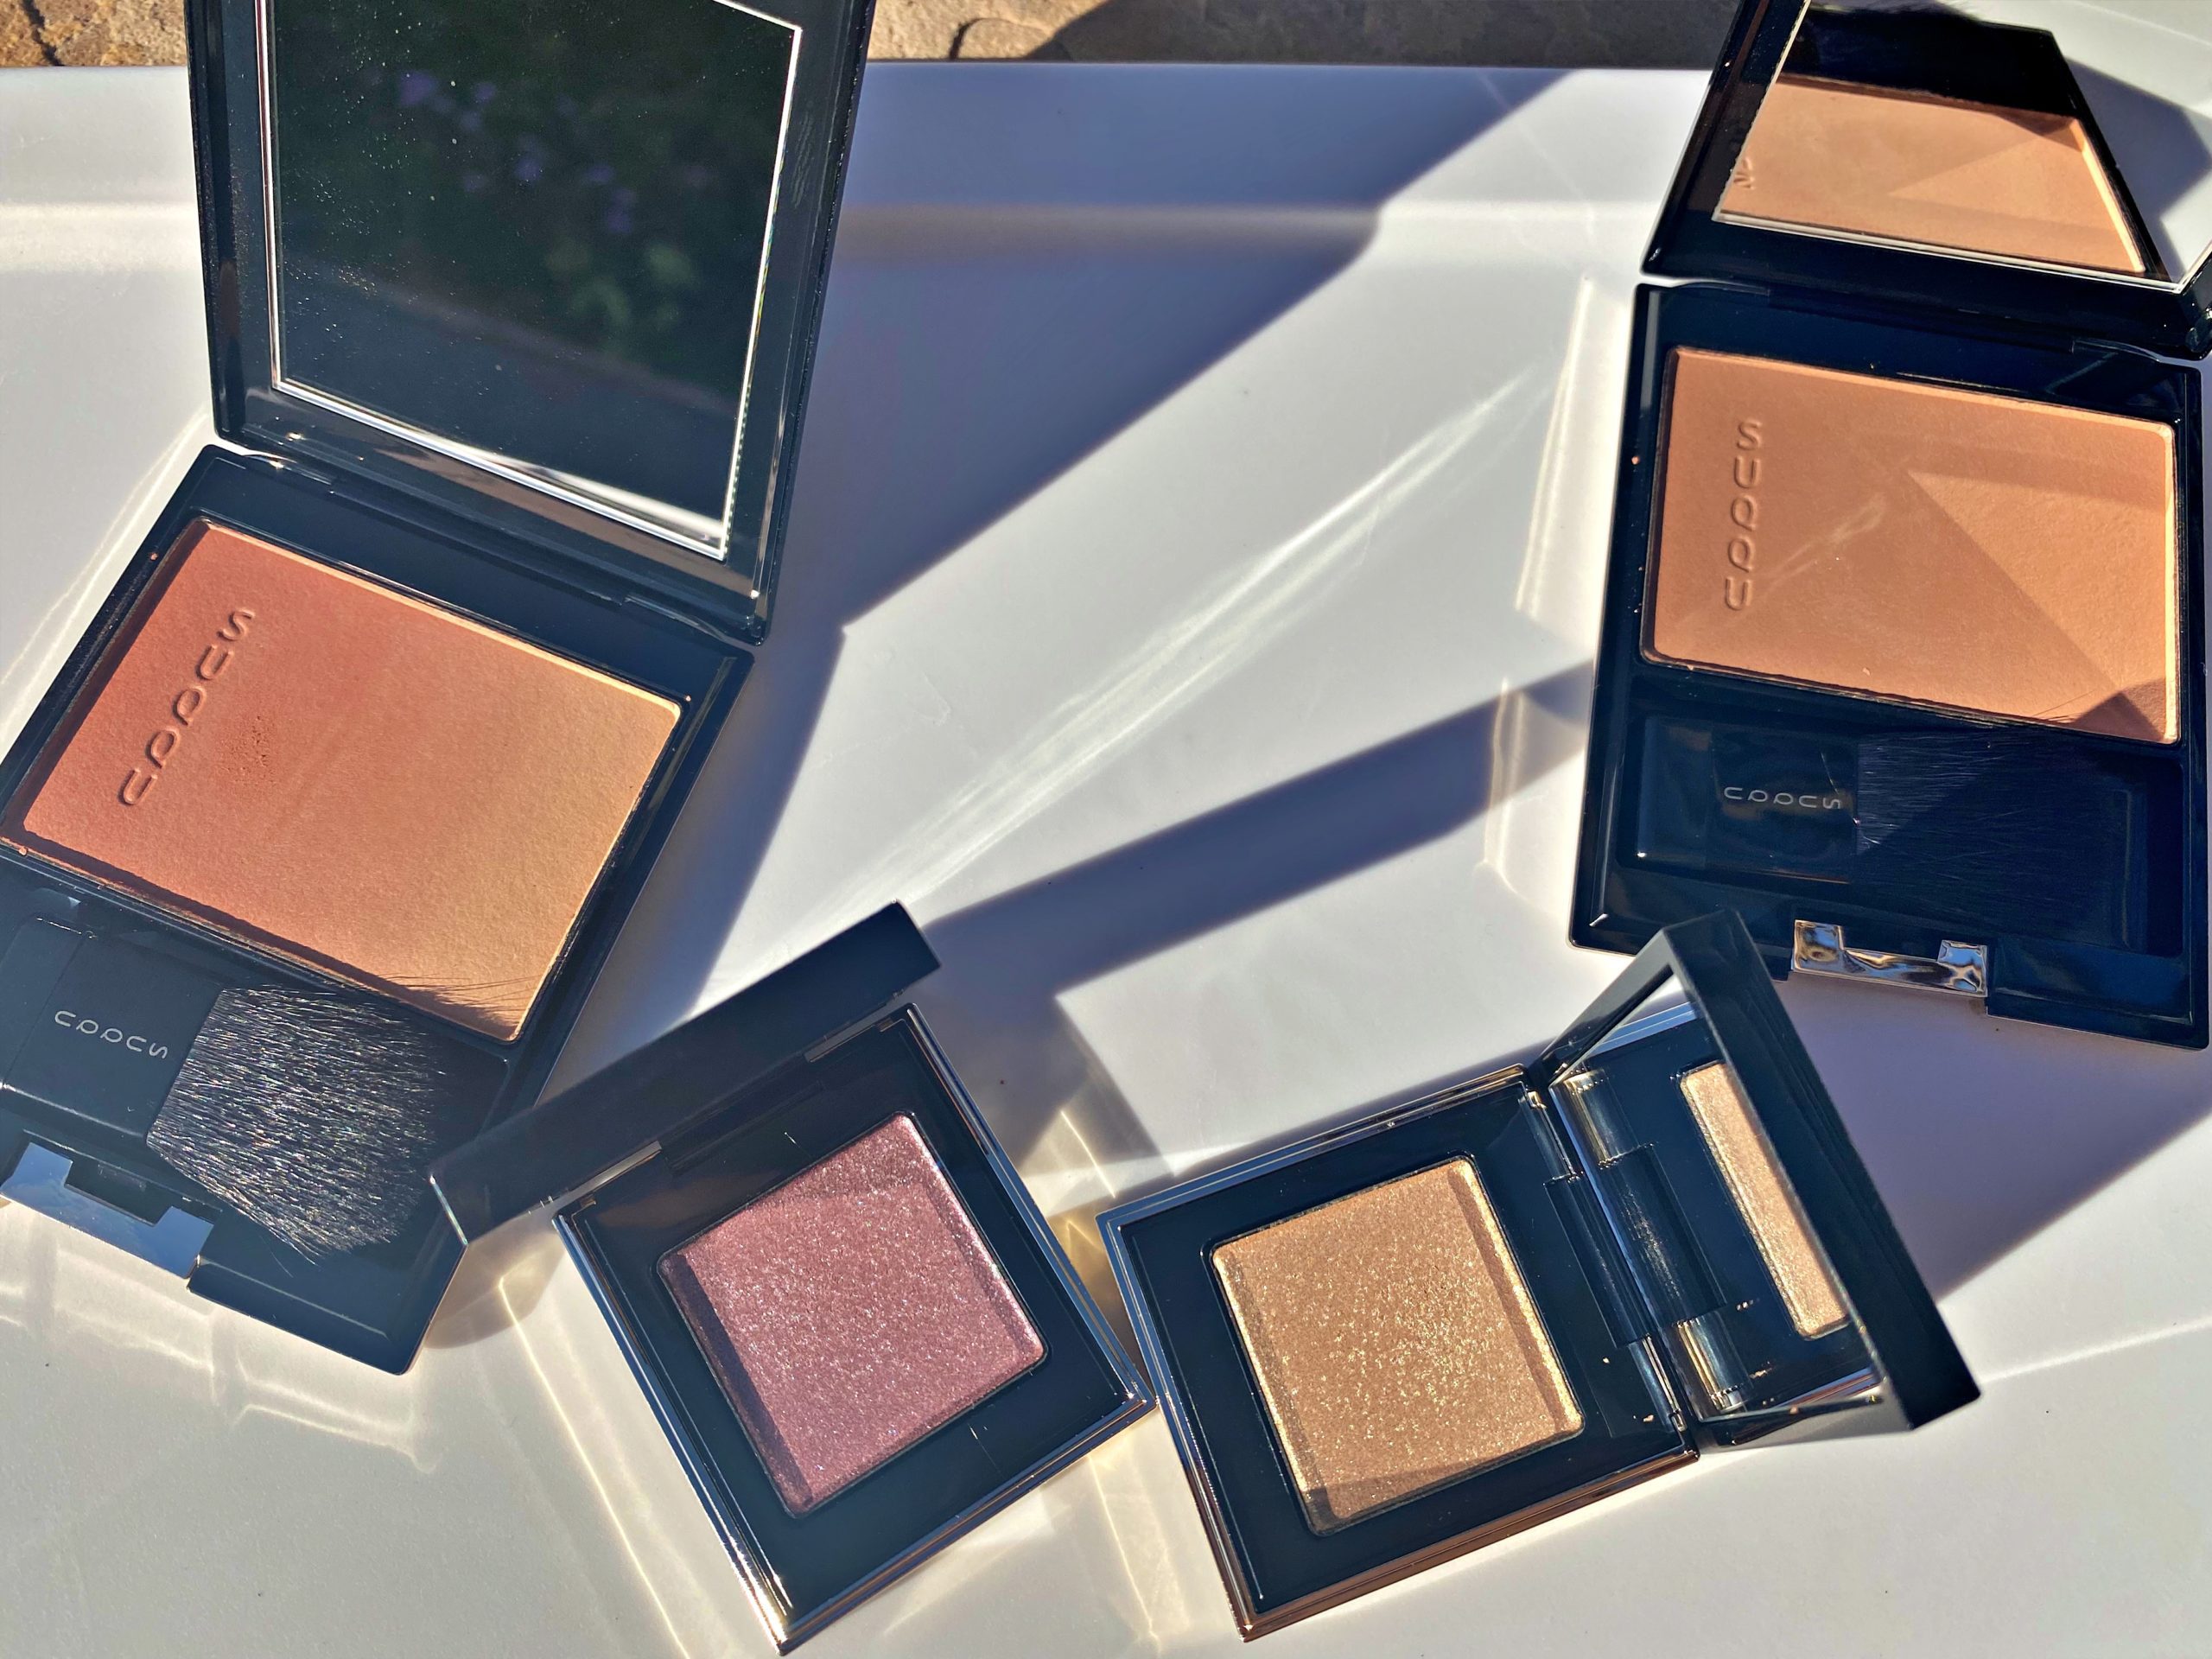 SUQQU A/W 2021 collection swatches for the face